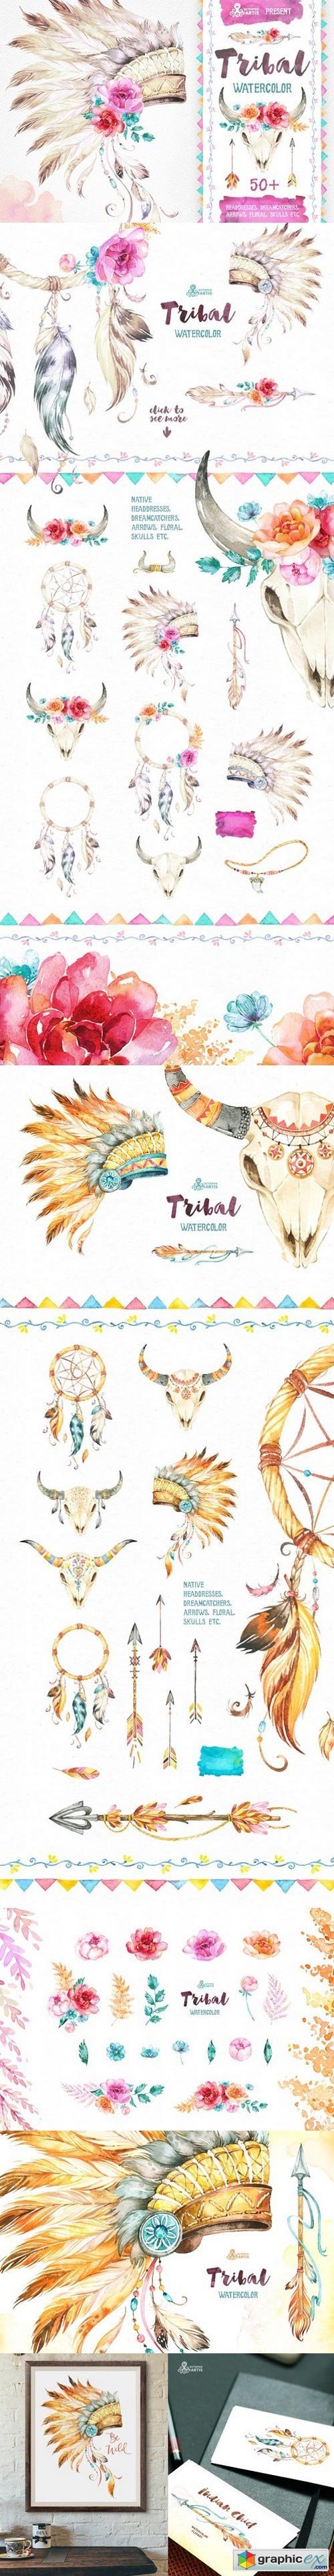 Tribal. Watercolor collection